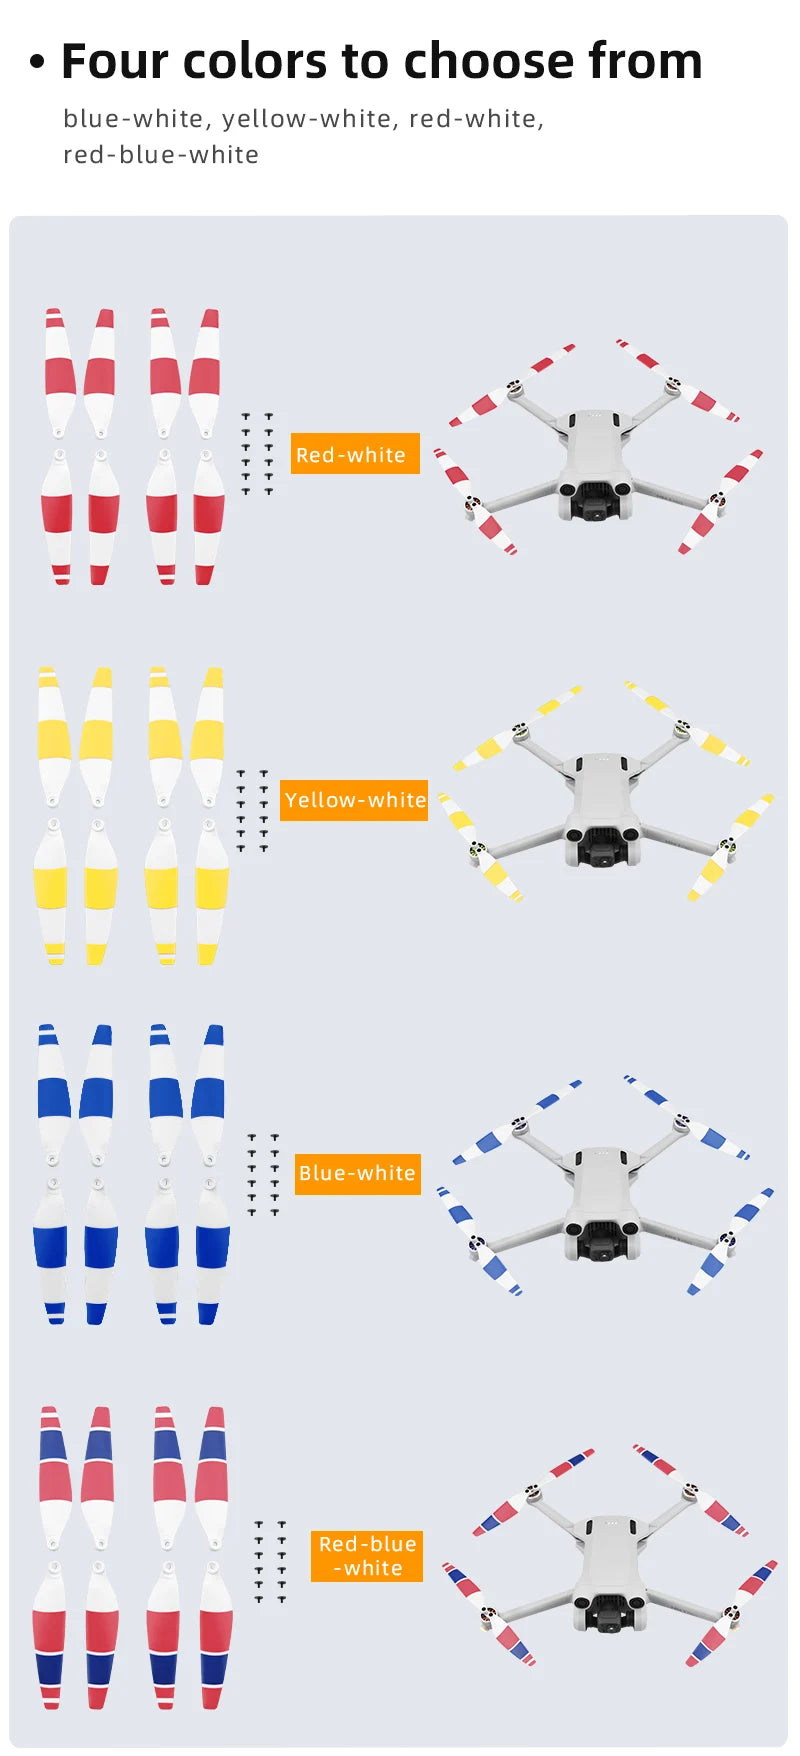 16PCS Replacement Propeller, four colors to choose from blue-white, yellow-white , red-white and red